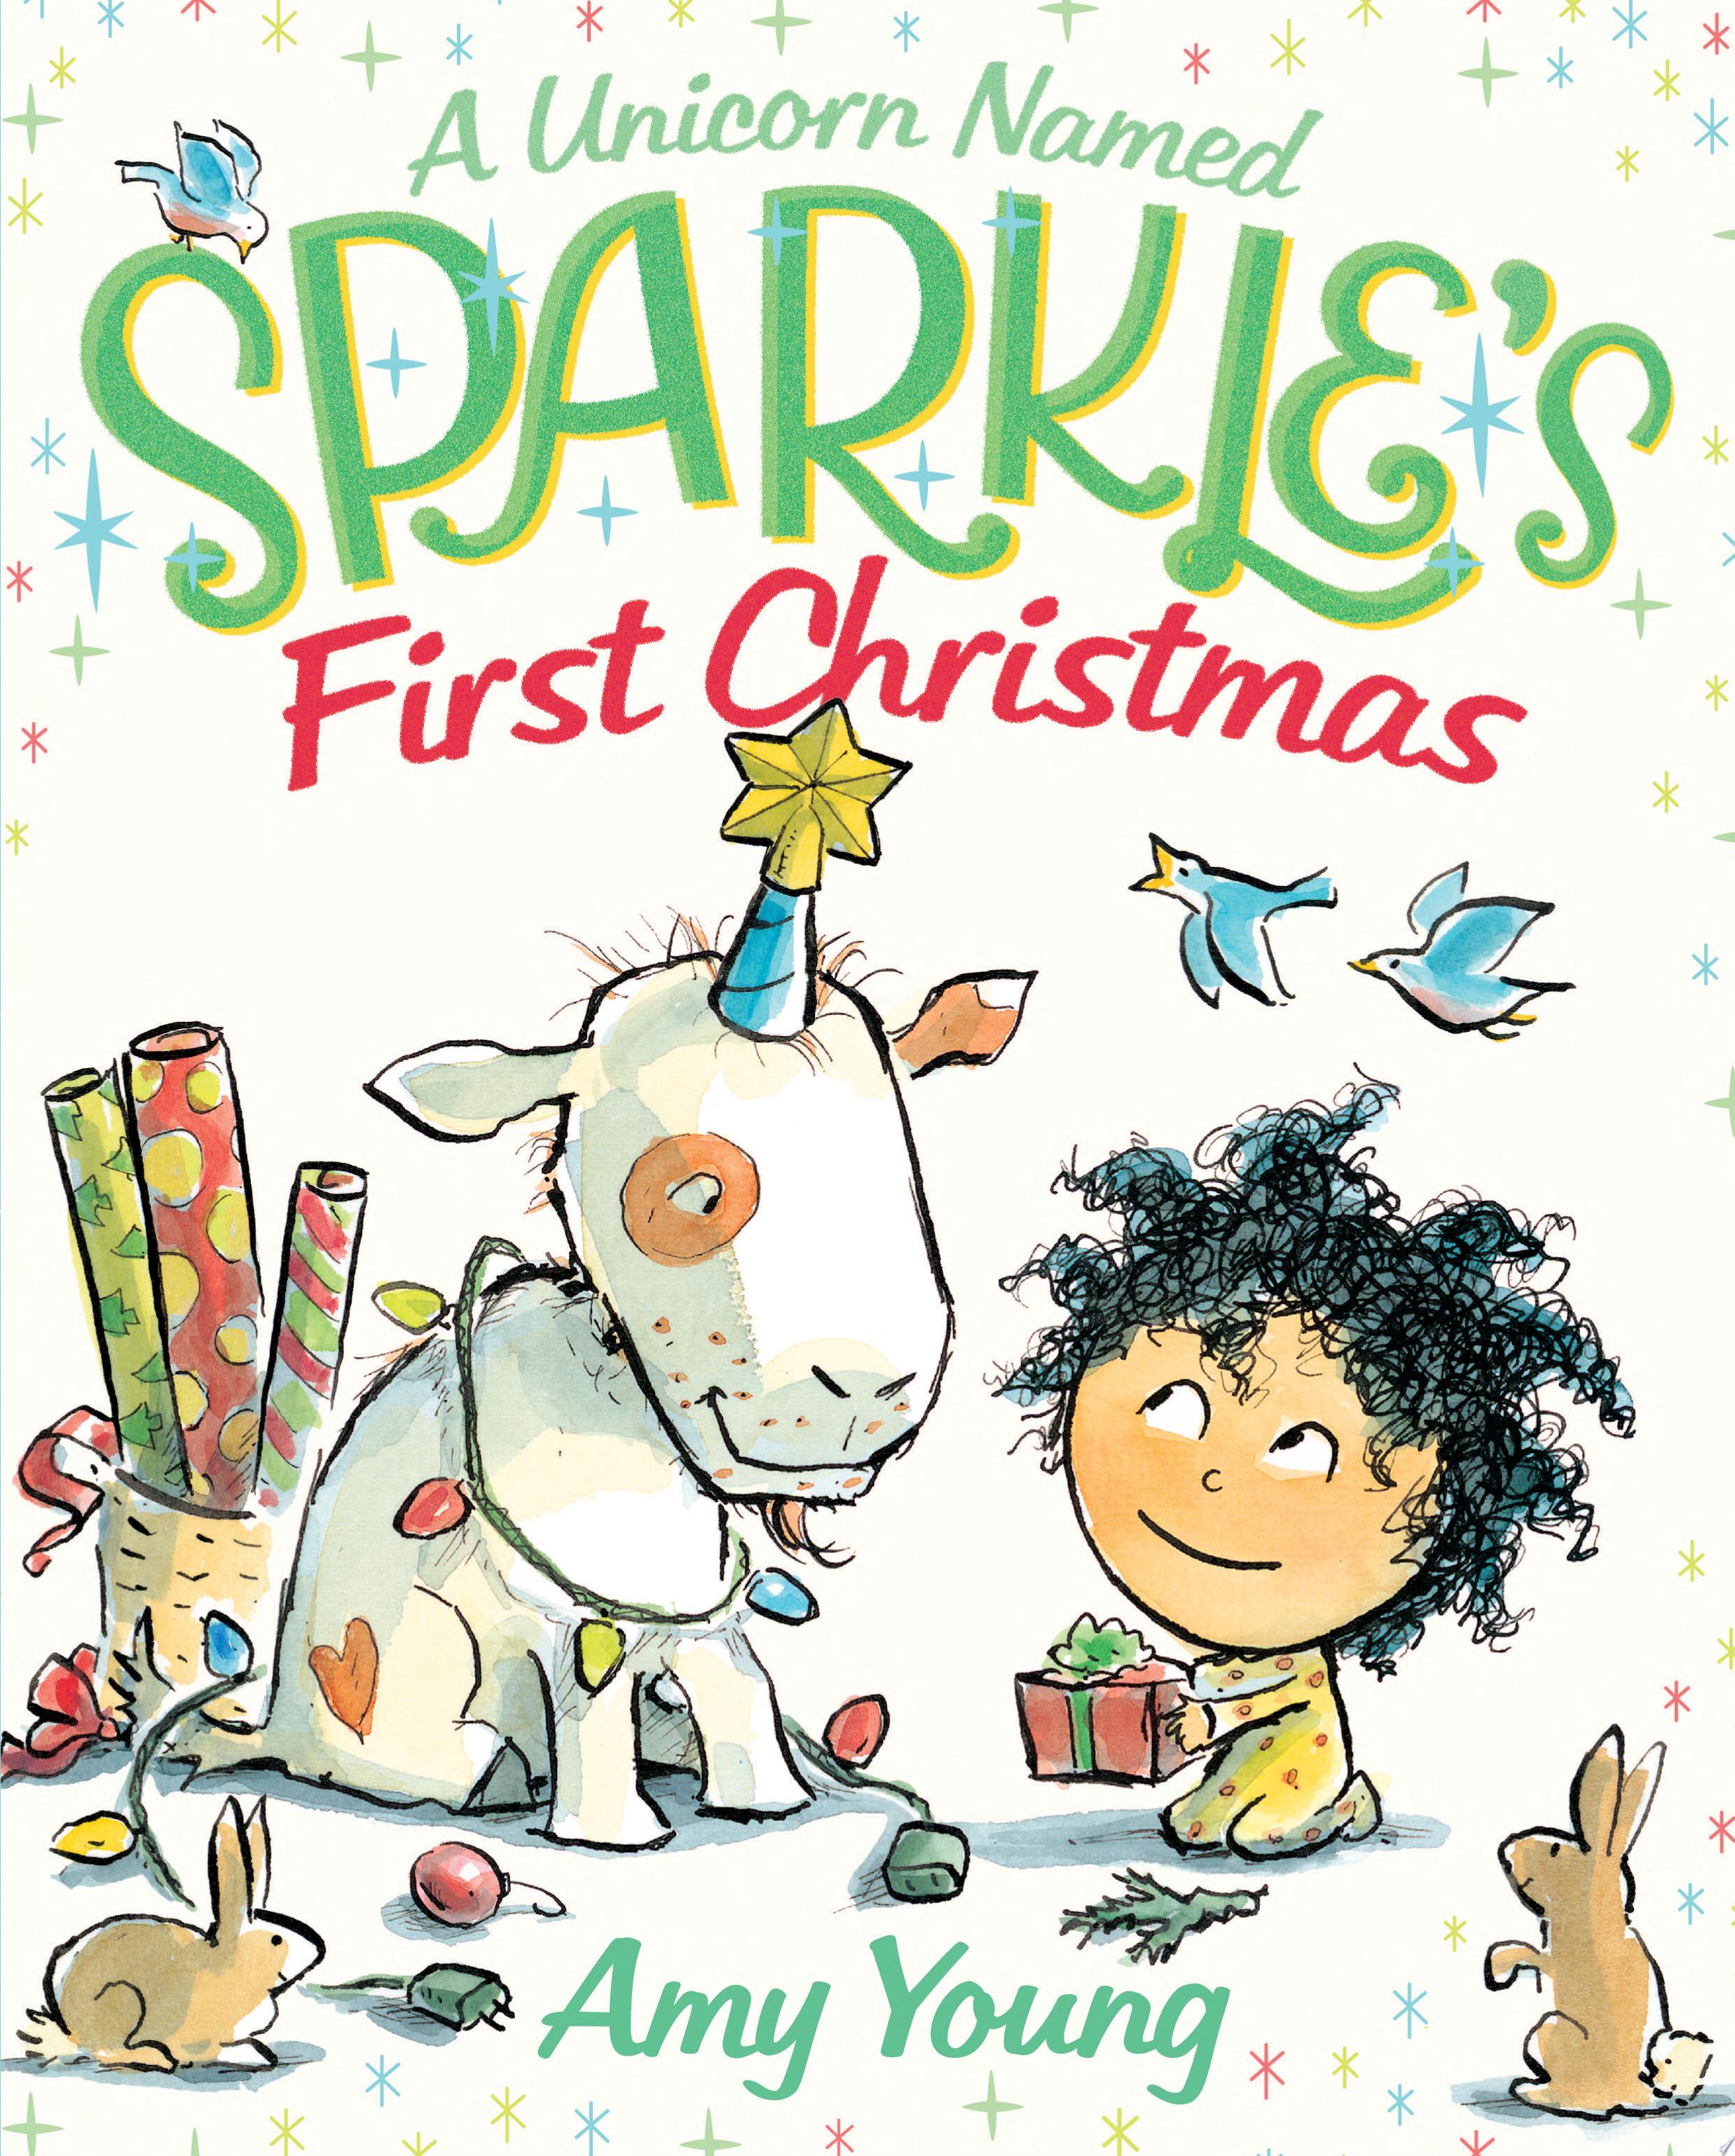 Image for "A Unicorn Named Sparkle's First Christmas"